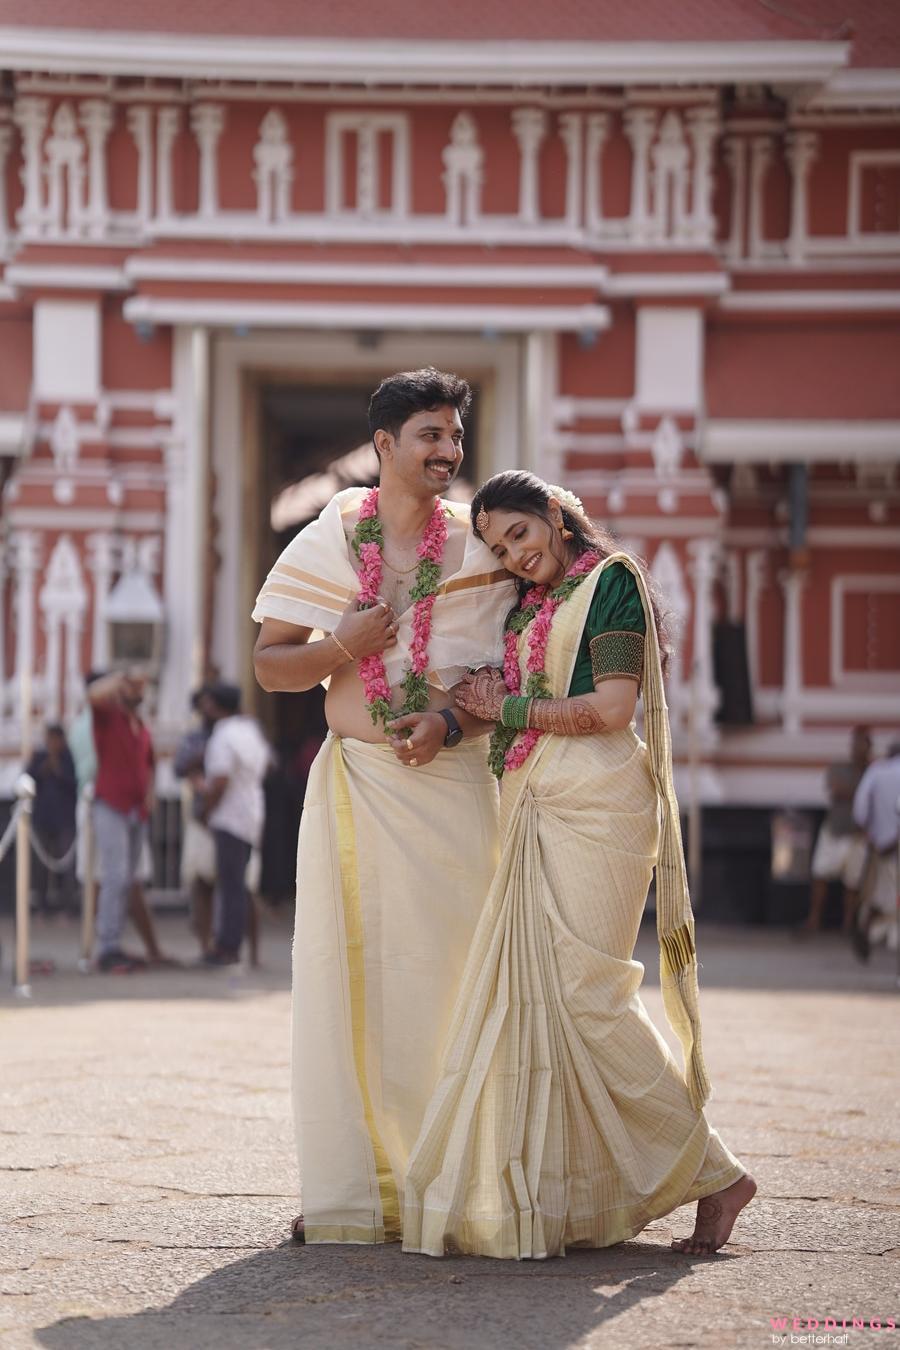 Funny Couple Poses For A Memorable Wedding in 2020